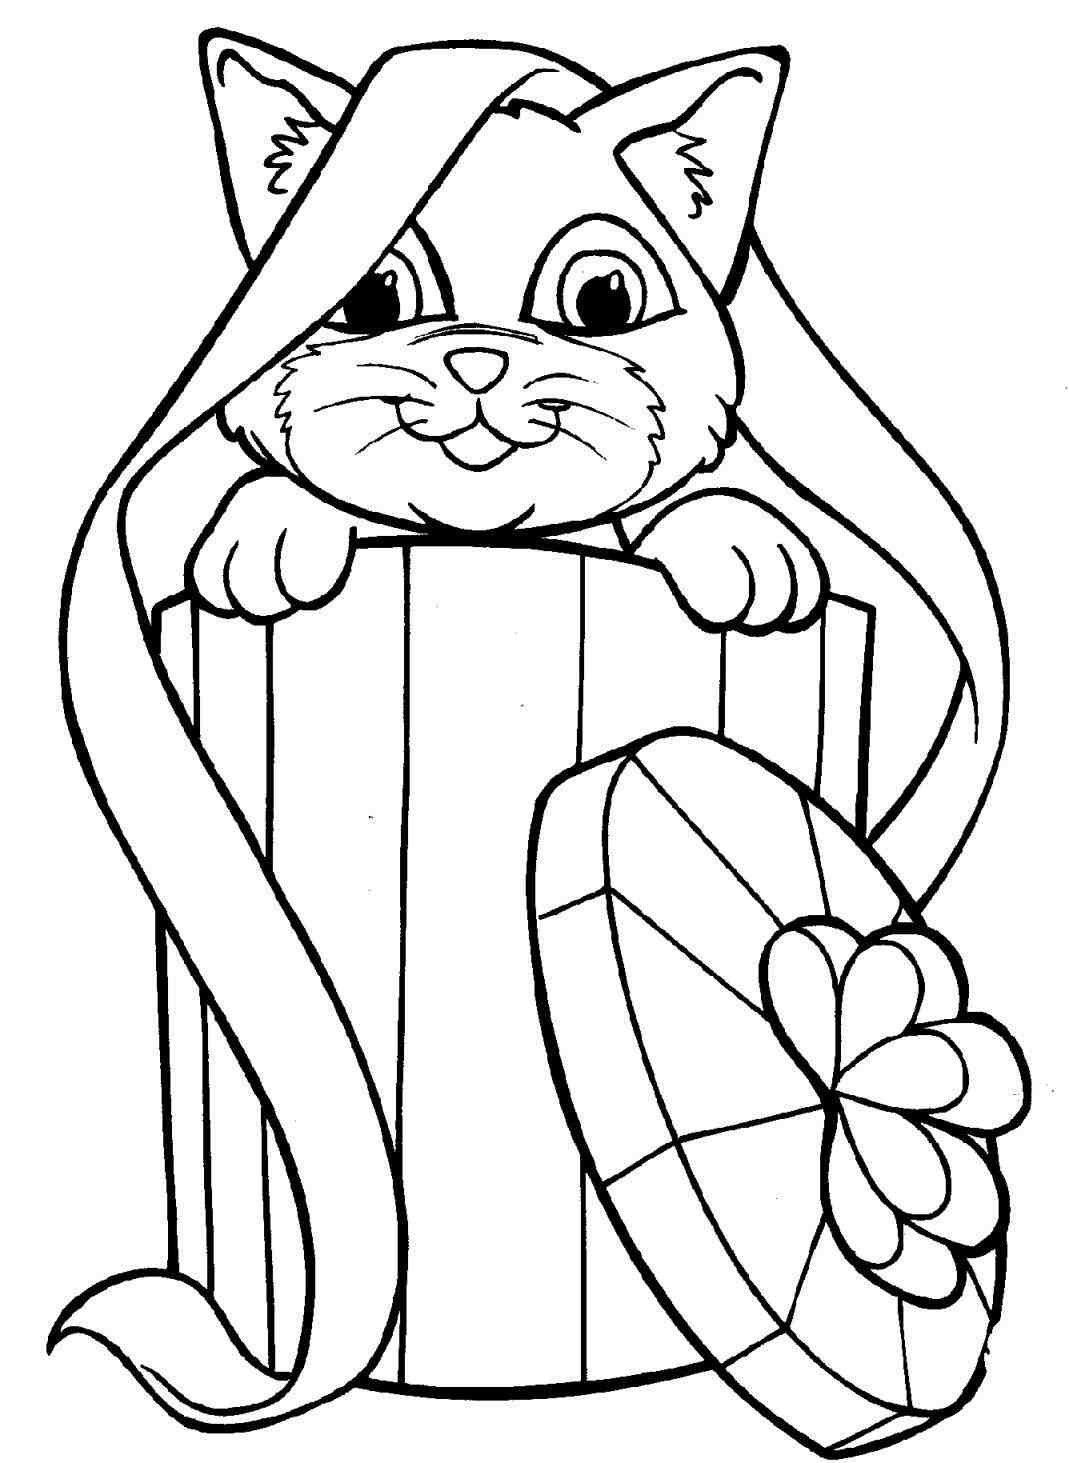 17 Free Pictures for: Kitten Coloring Page. Temoon.us